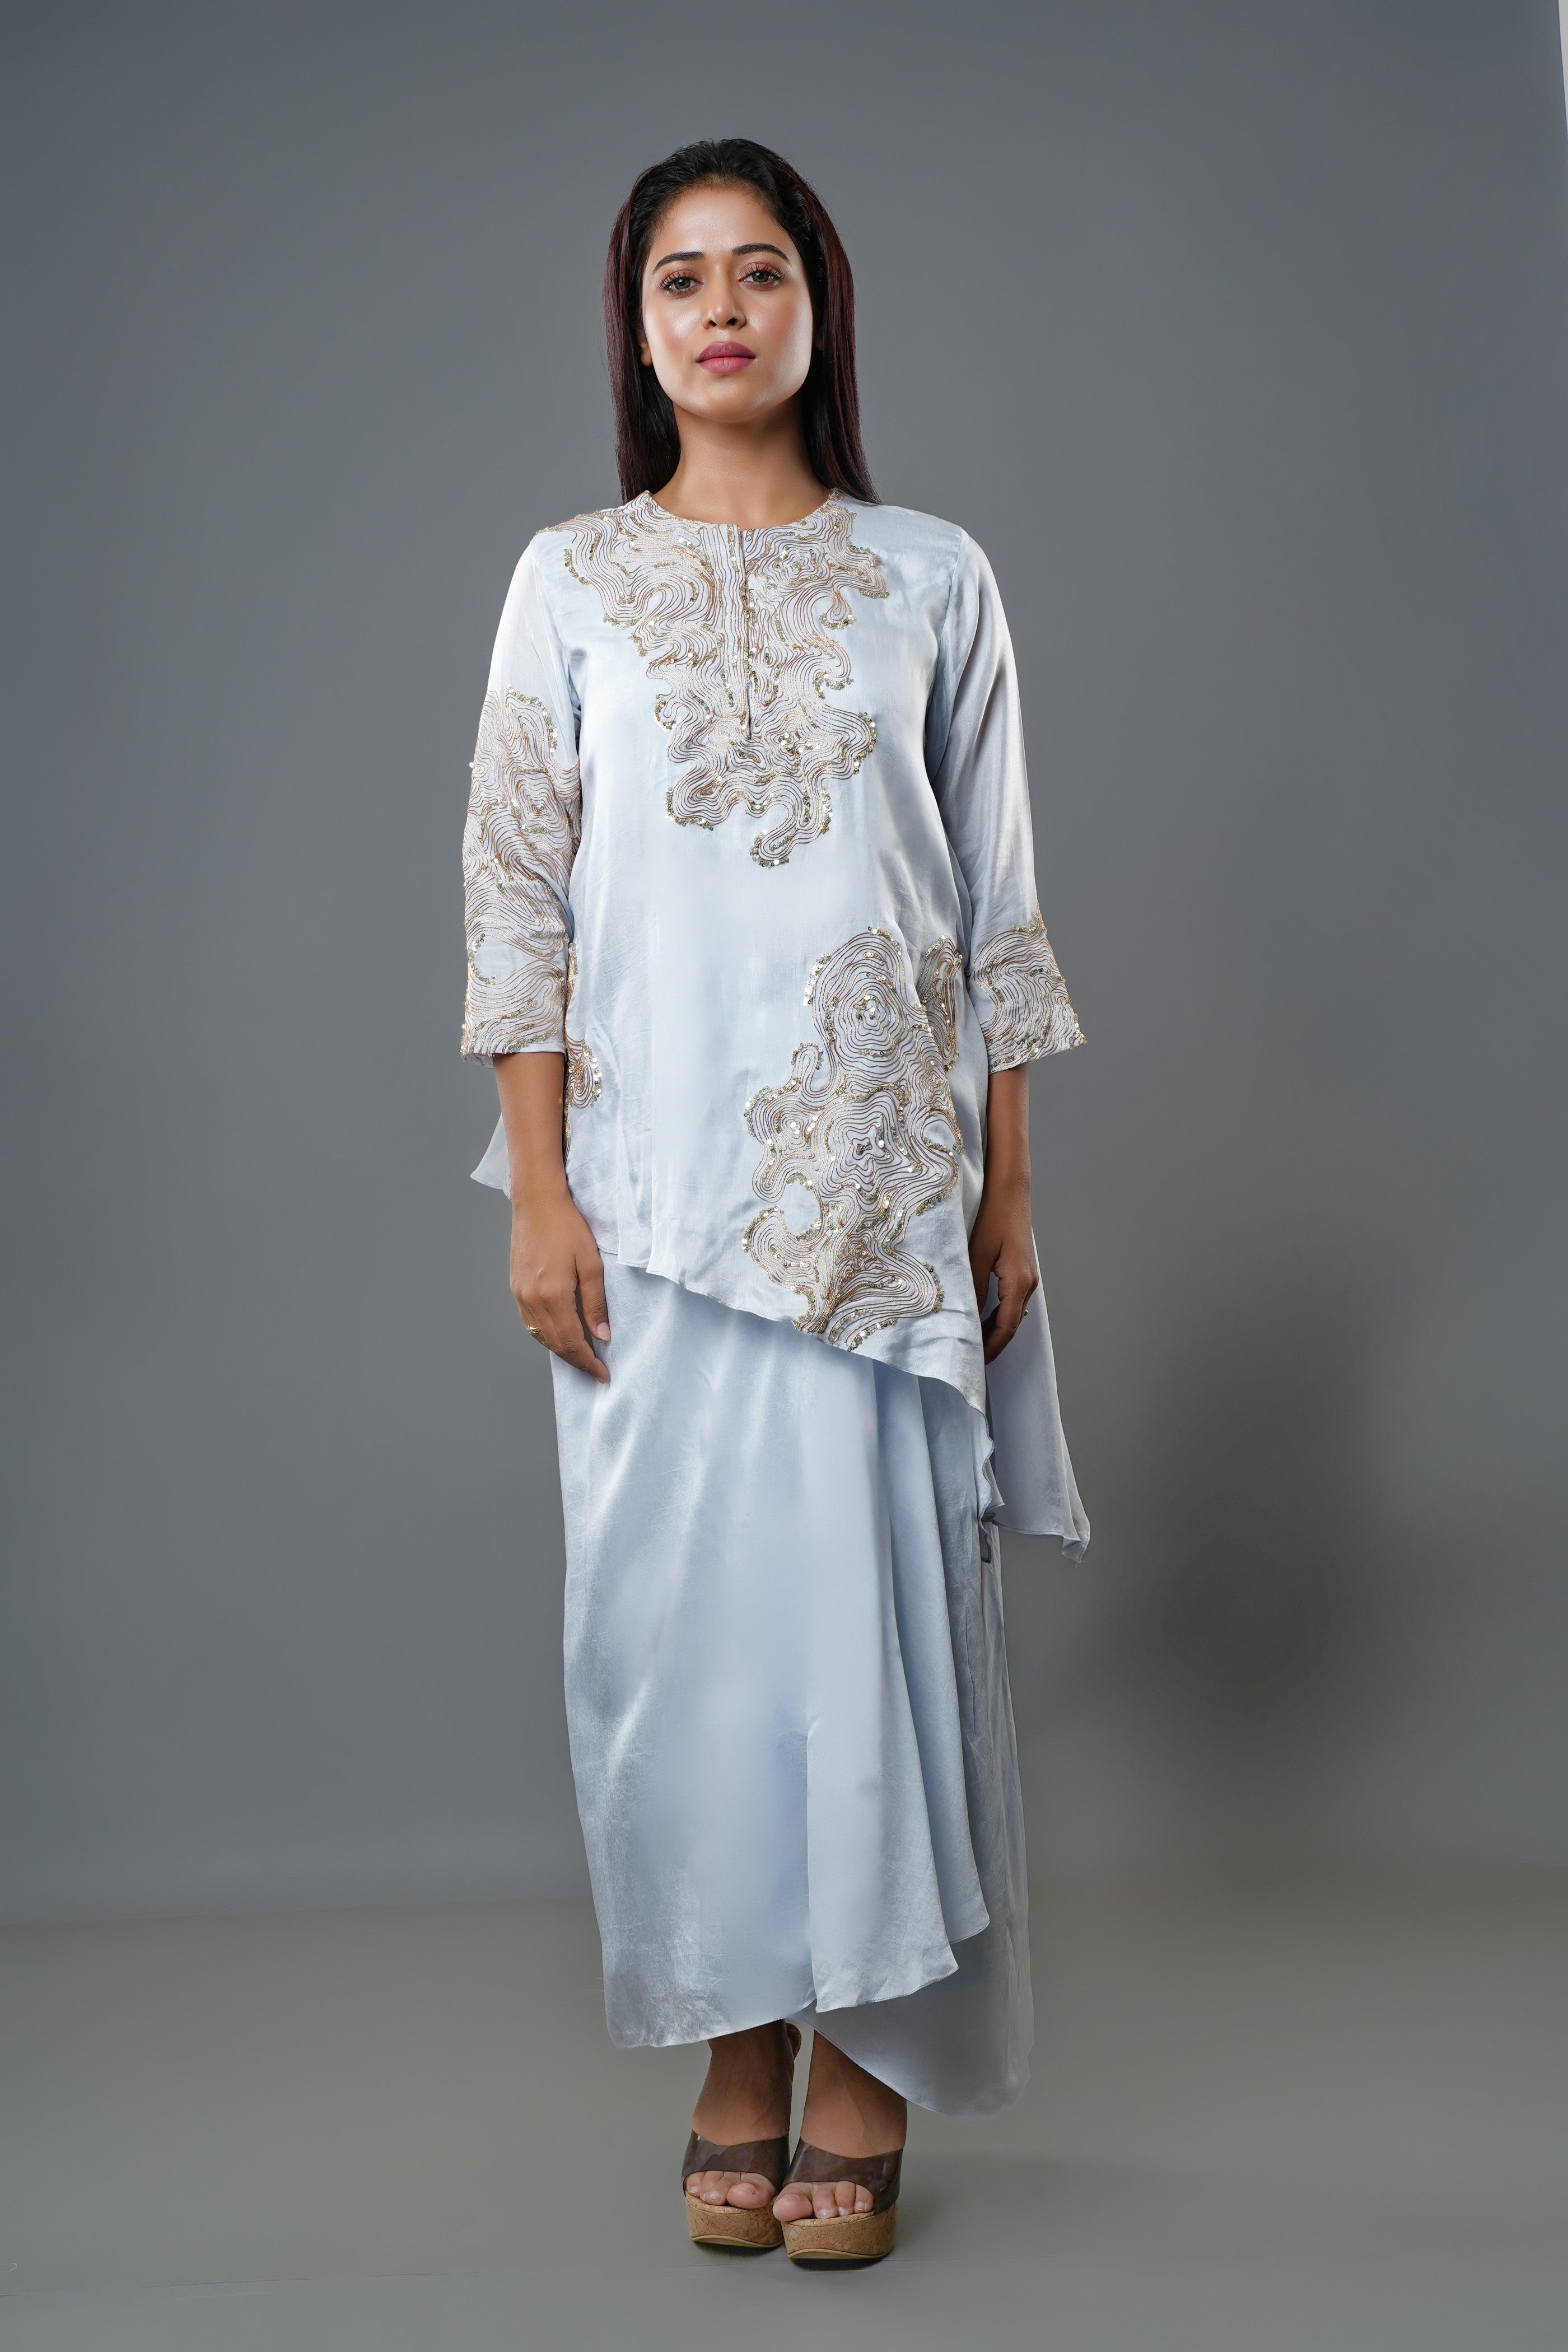 Embellished Top with Dhoti-Pattered Skirt - 1409